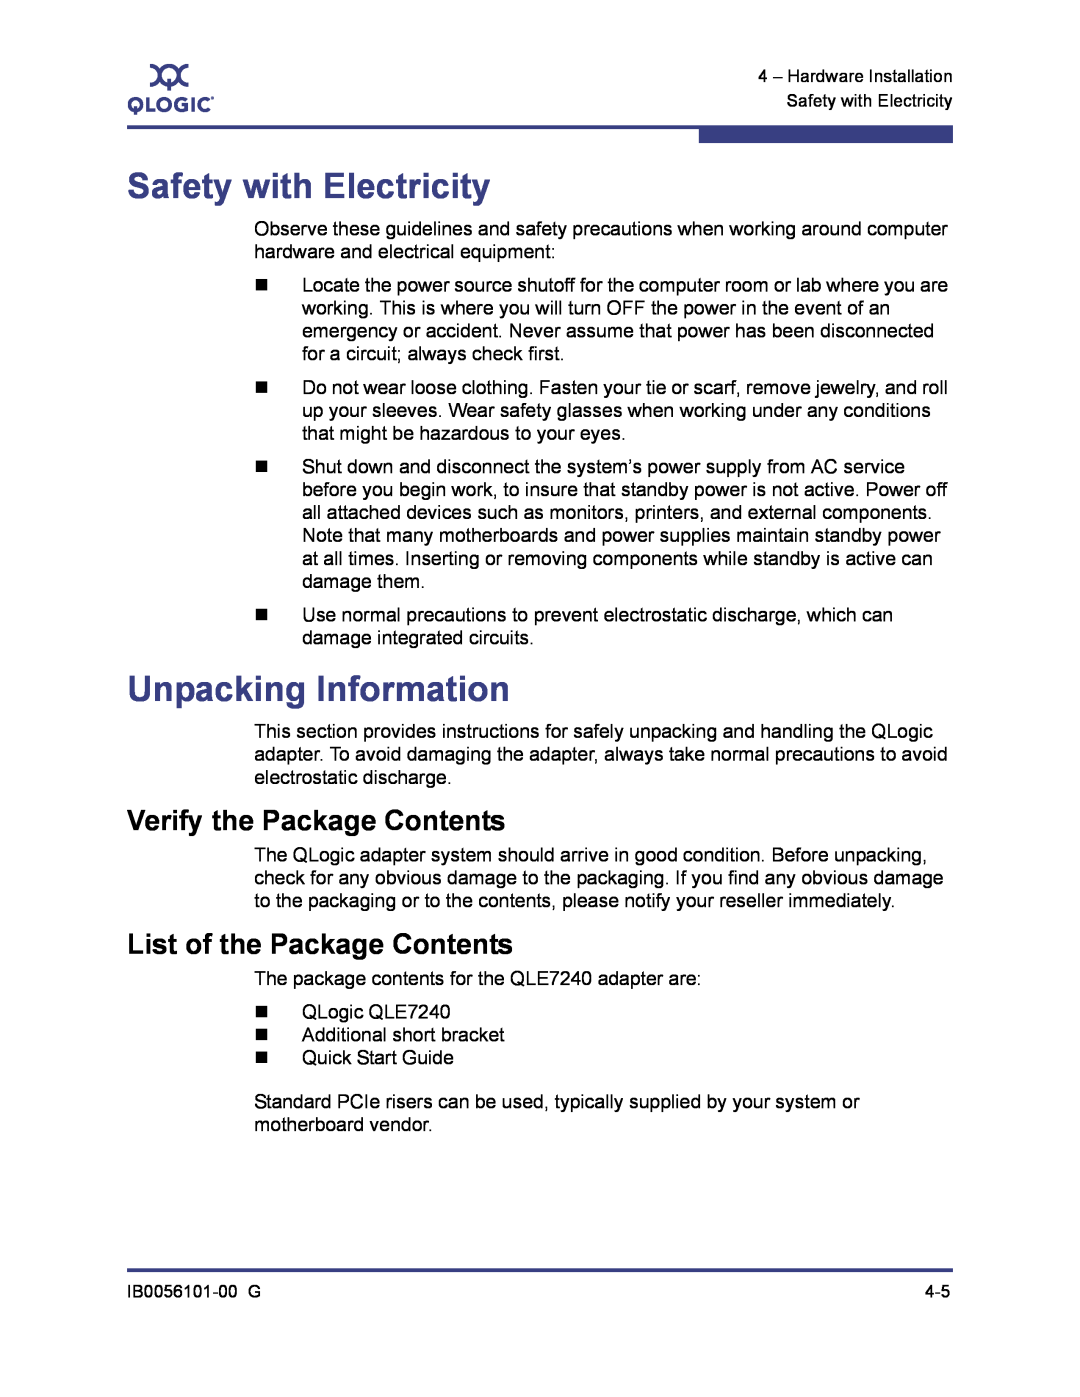 Q-Logic IB0056101-00 G manual Safety with Electricity, Unpacking Information, Verify the Package Contents 